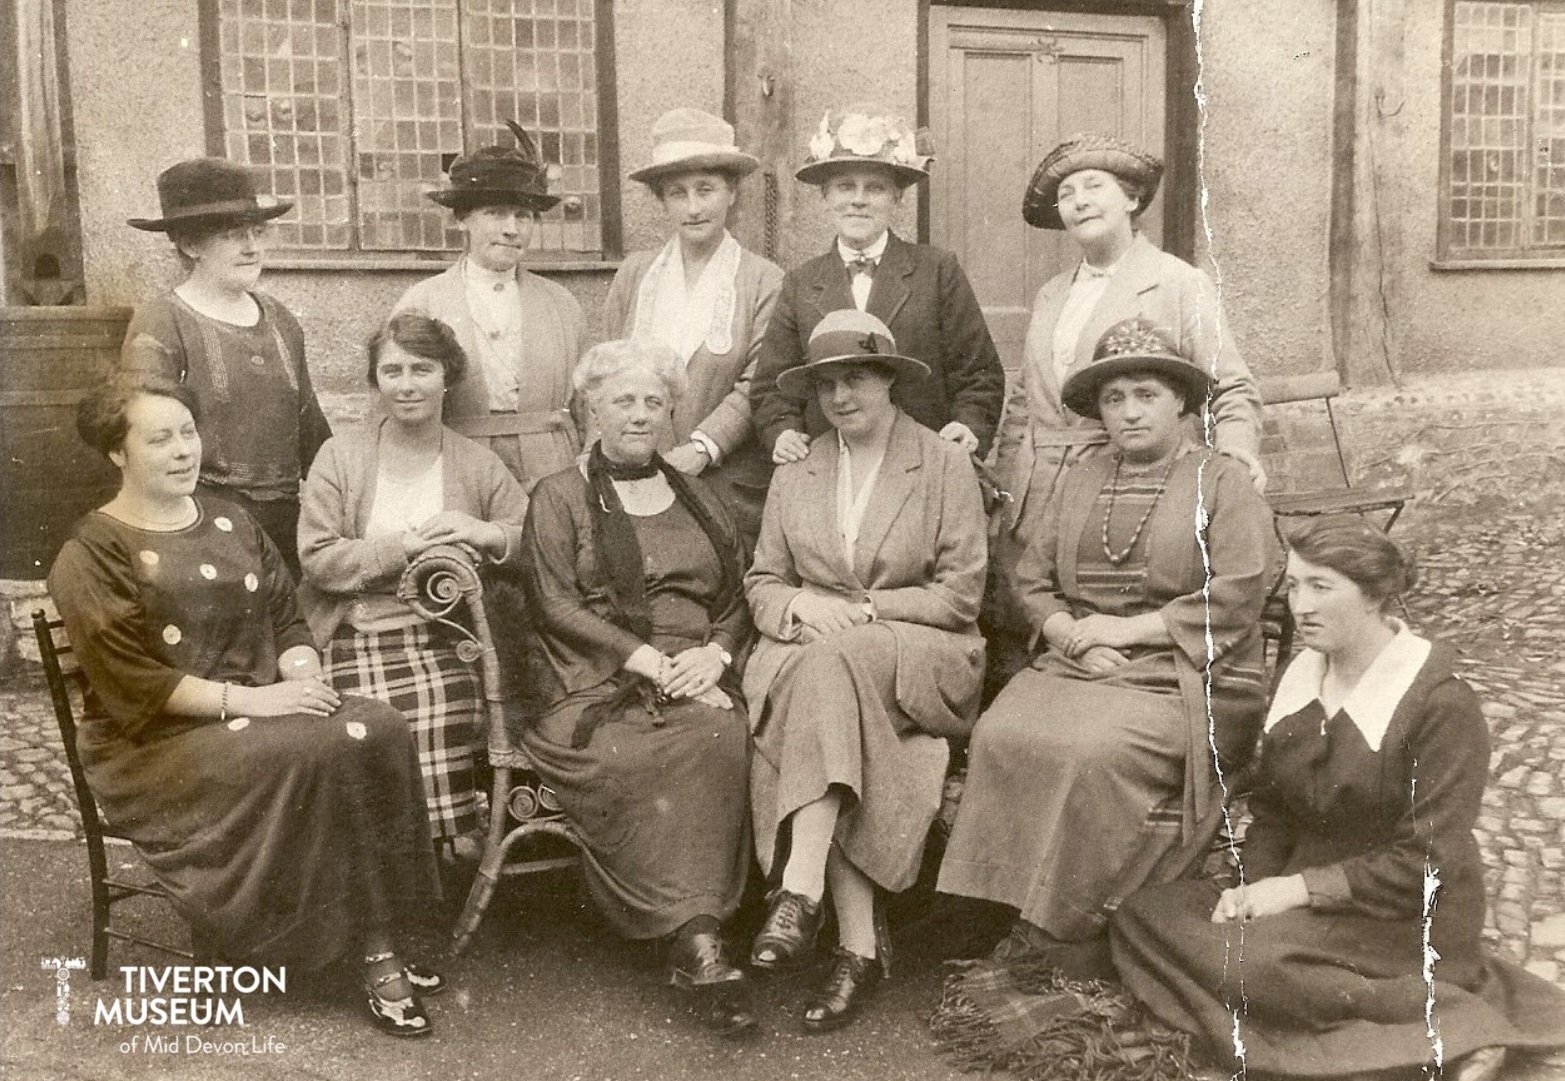 A black and white photo showing 6 seated women with 5 women standing behind them, in front of a building. The women are dressed in Edwardian fashion with loose, flowing clothing (dresses and skirts). Several of the women are wearing hats. The women look relaxed and most are smiling.